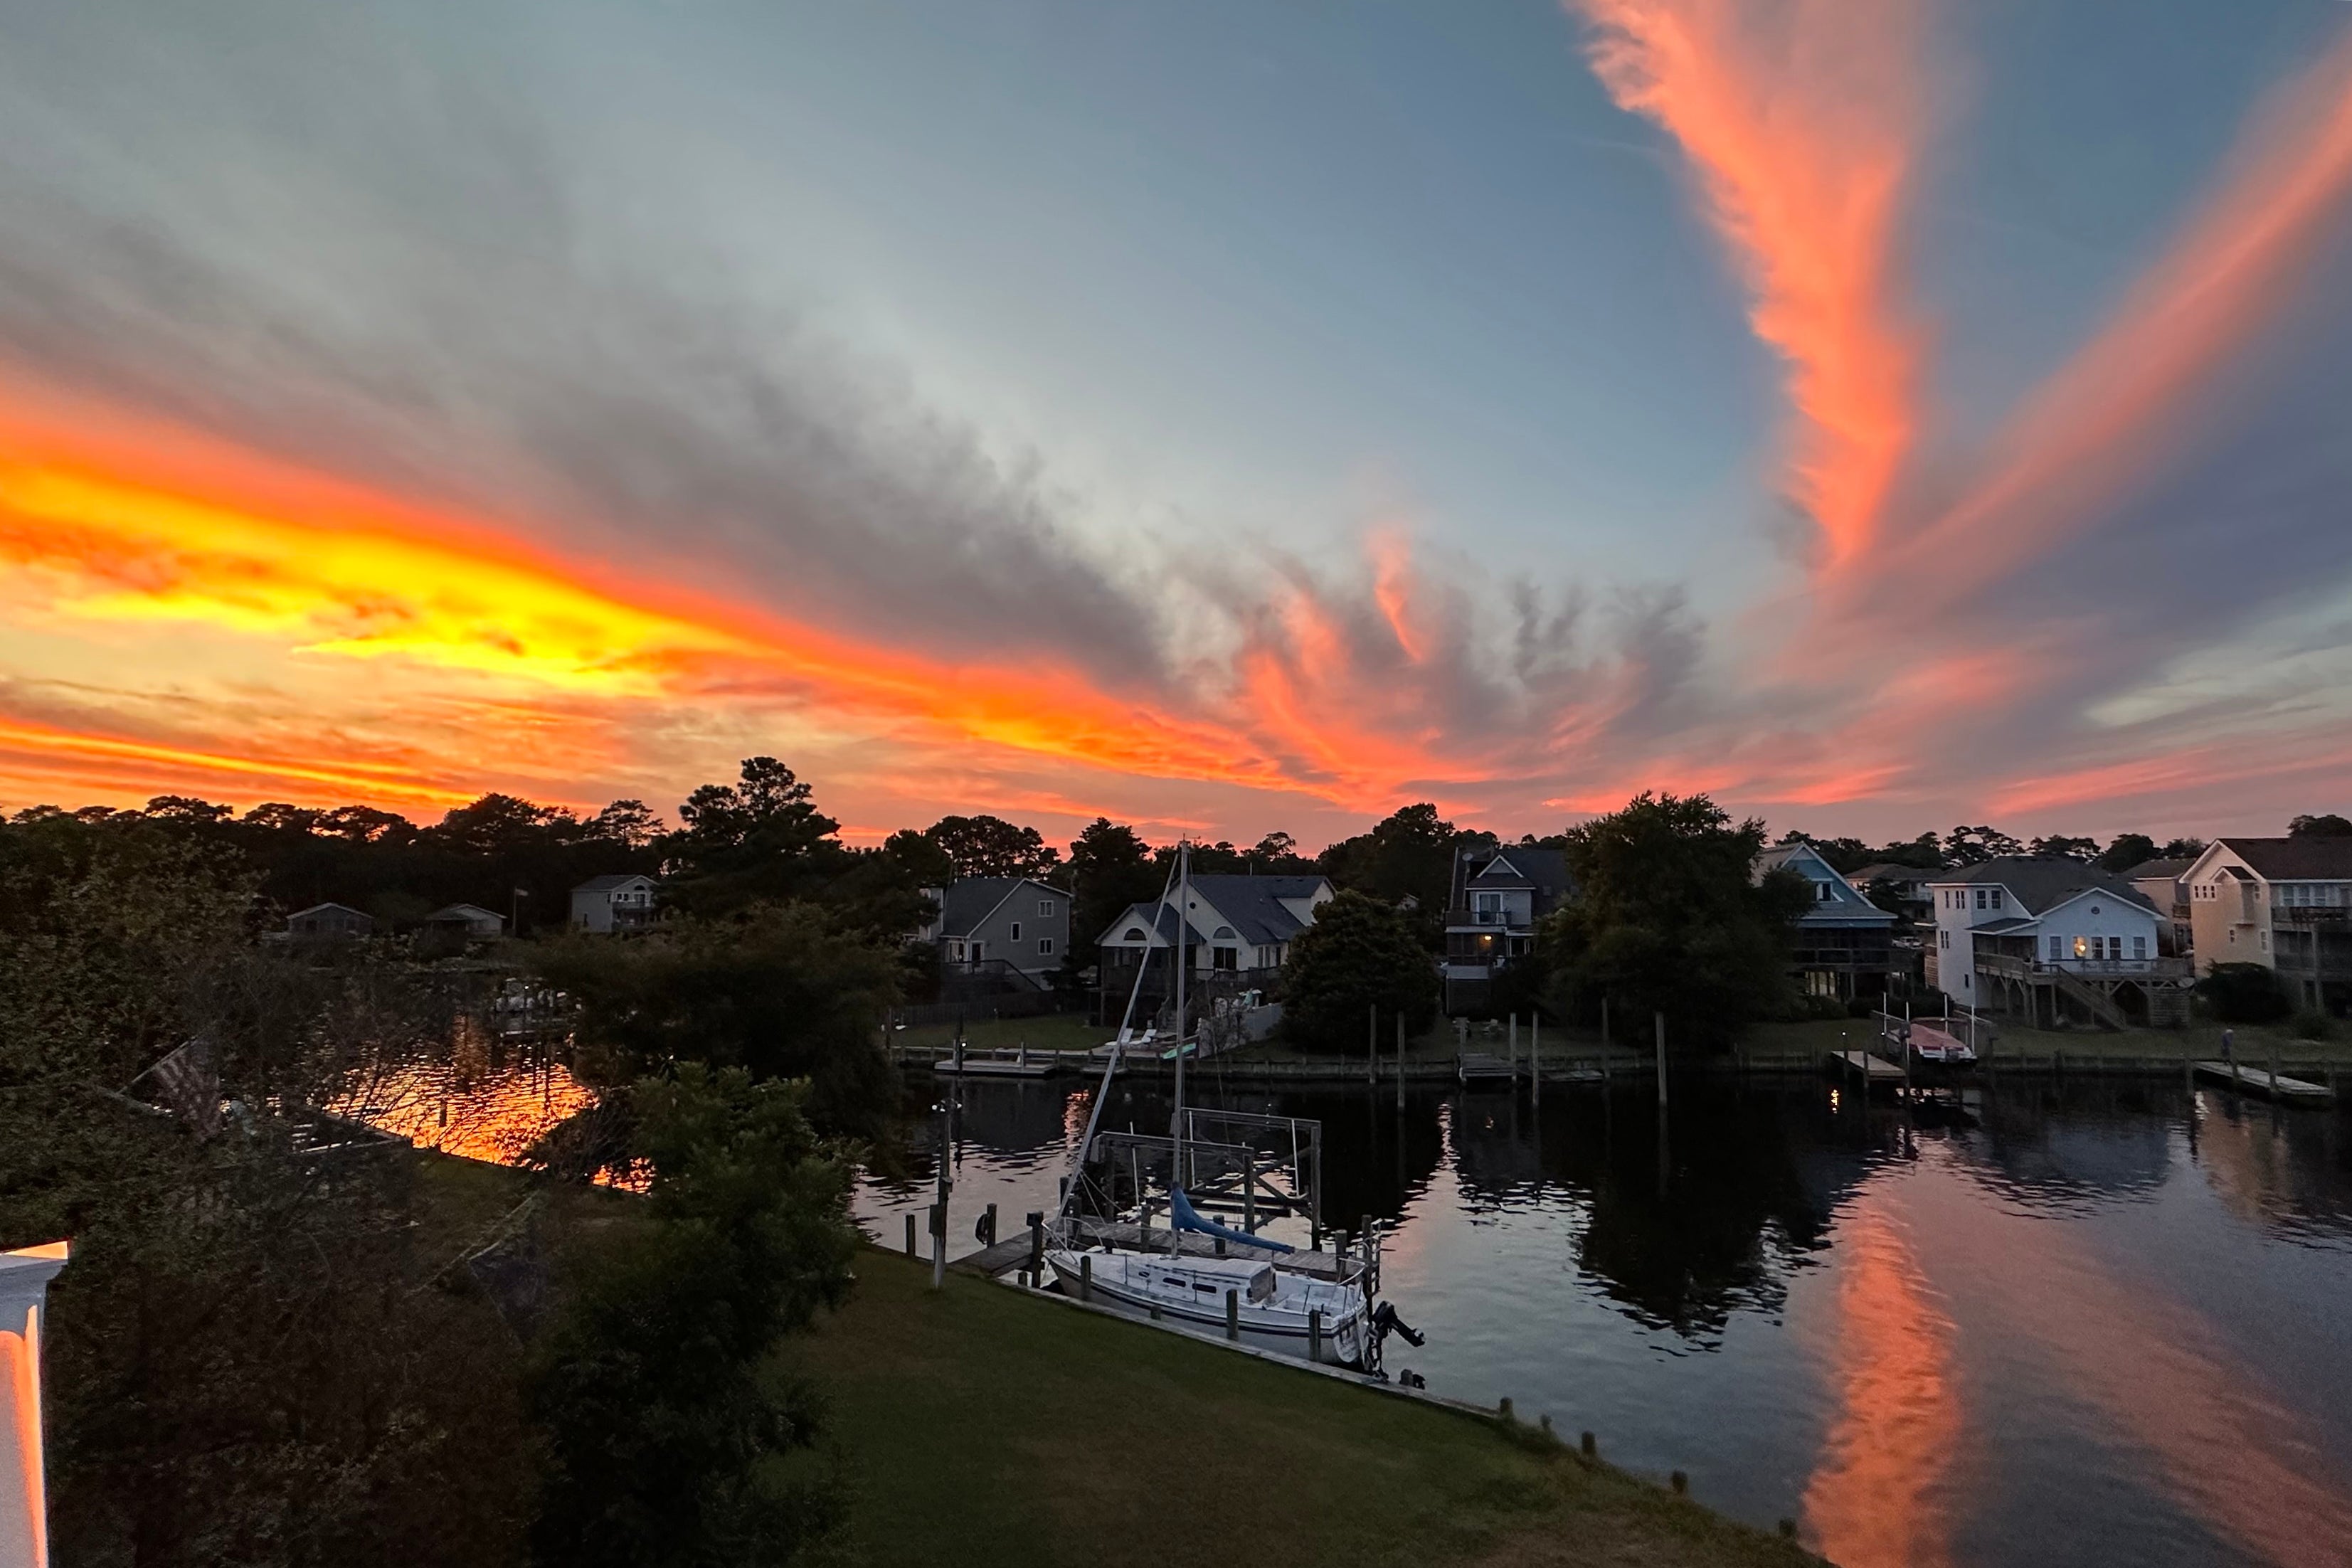 CH75: Dockside Dream | Top Level Deck View at Sunset